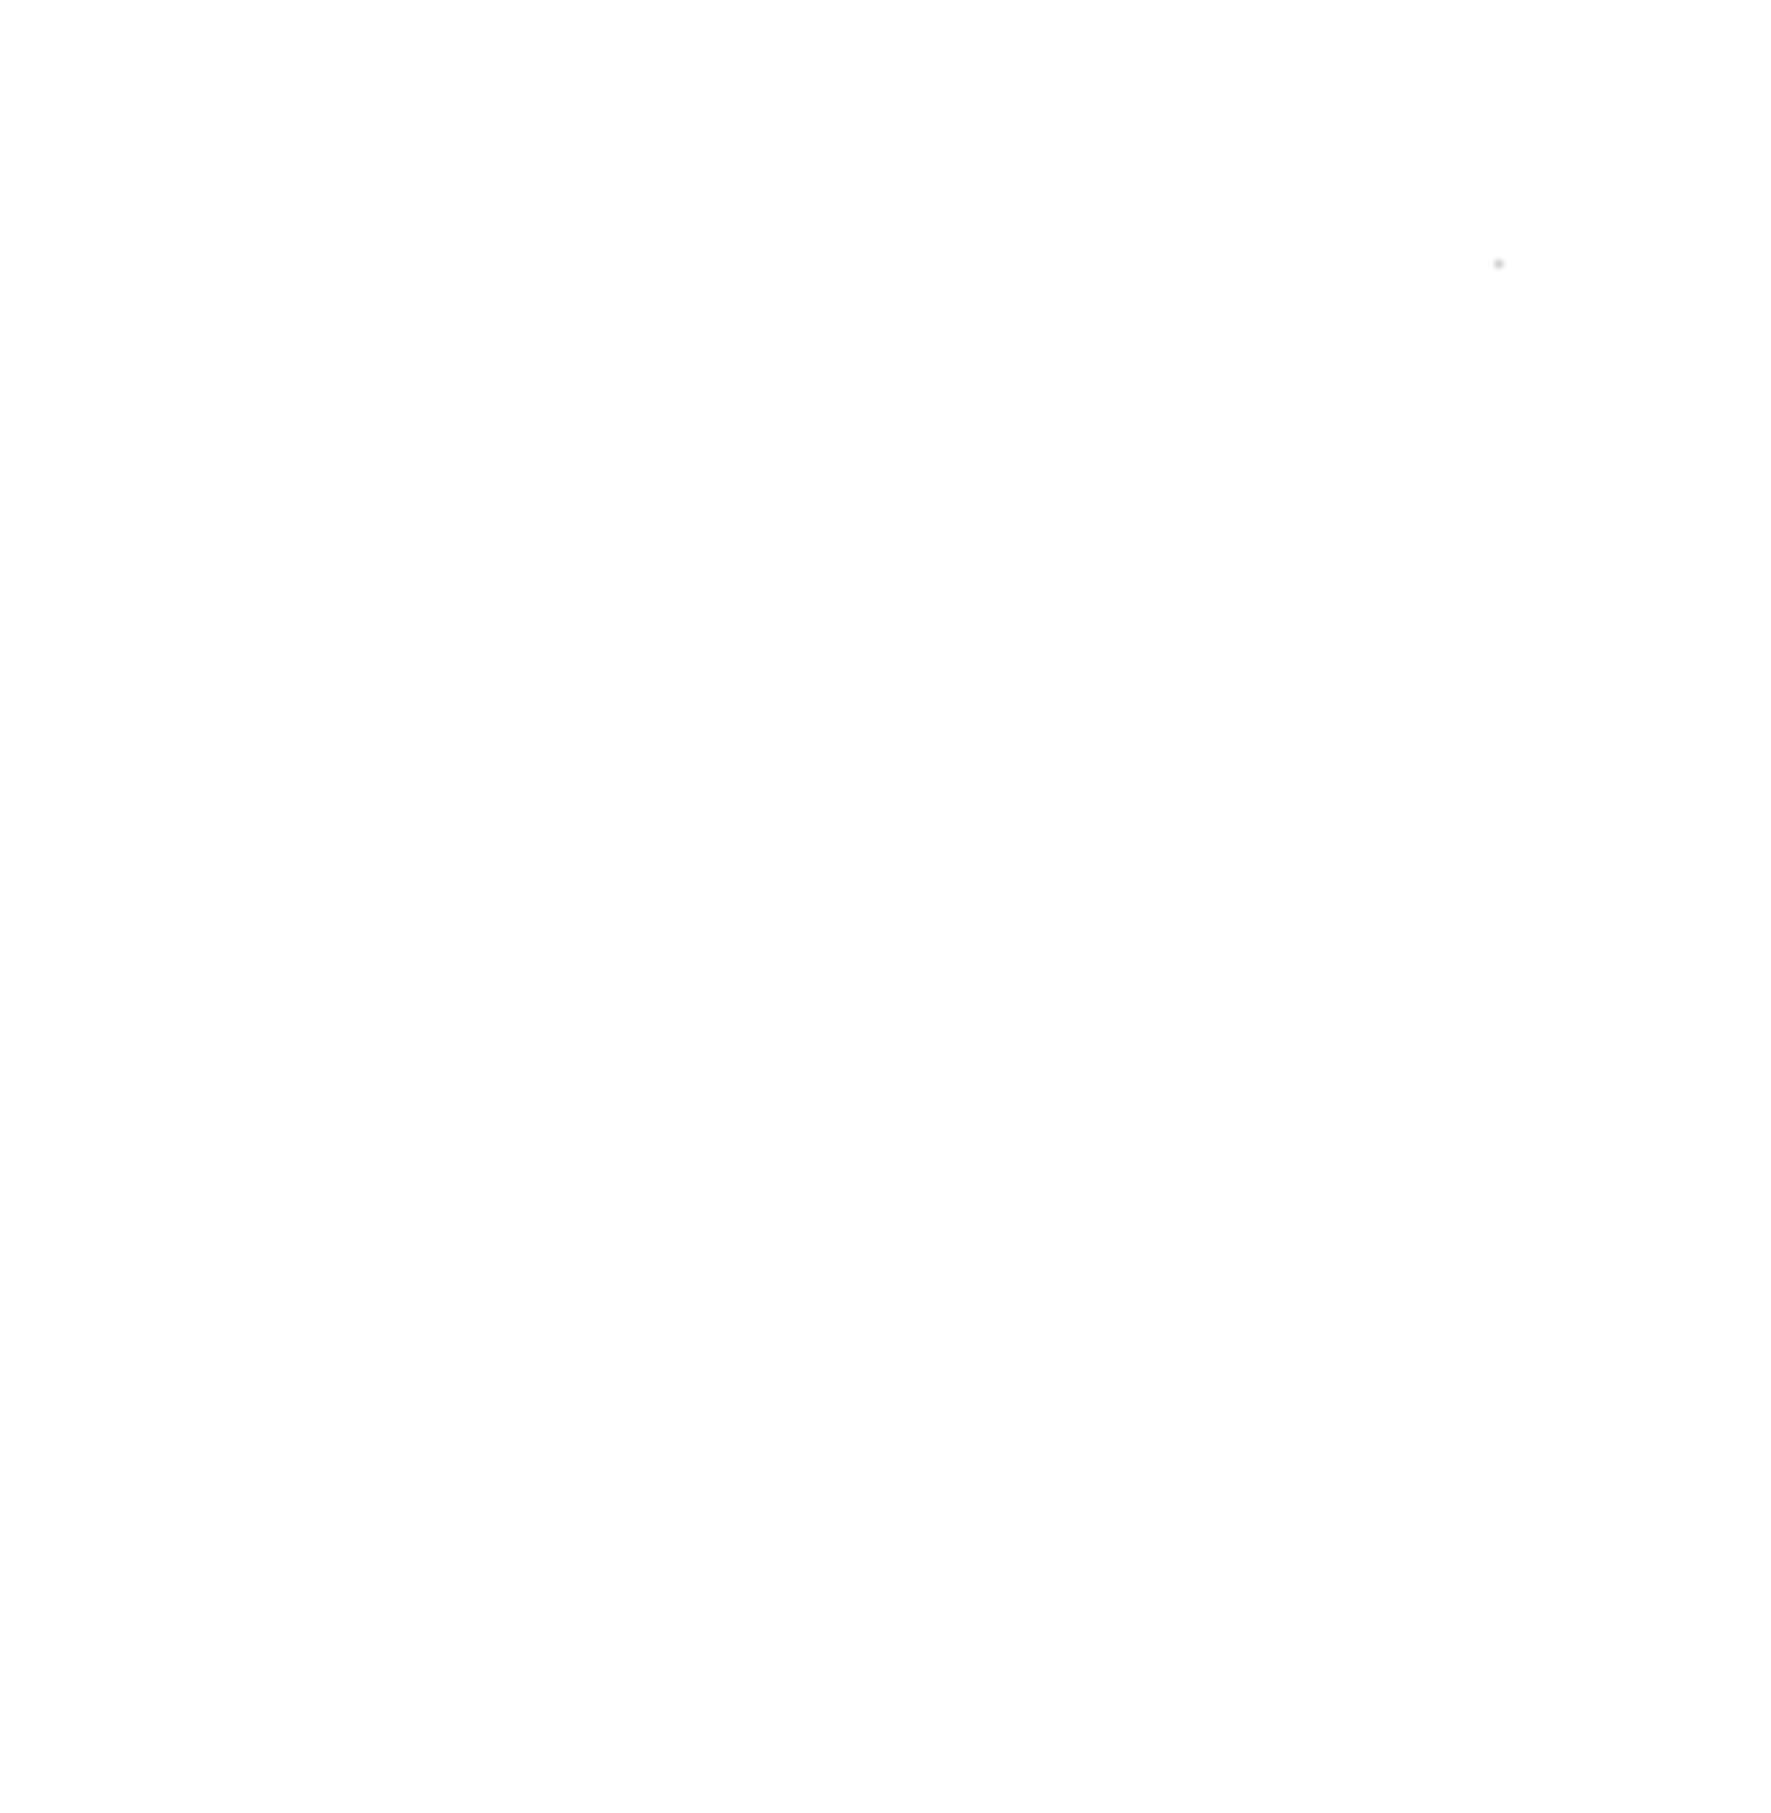 A3E Apogee Engineered Exraction Equipment